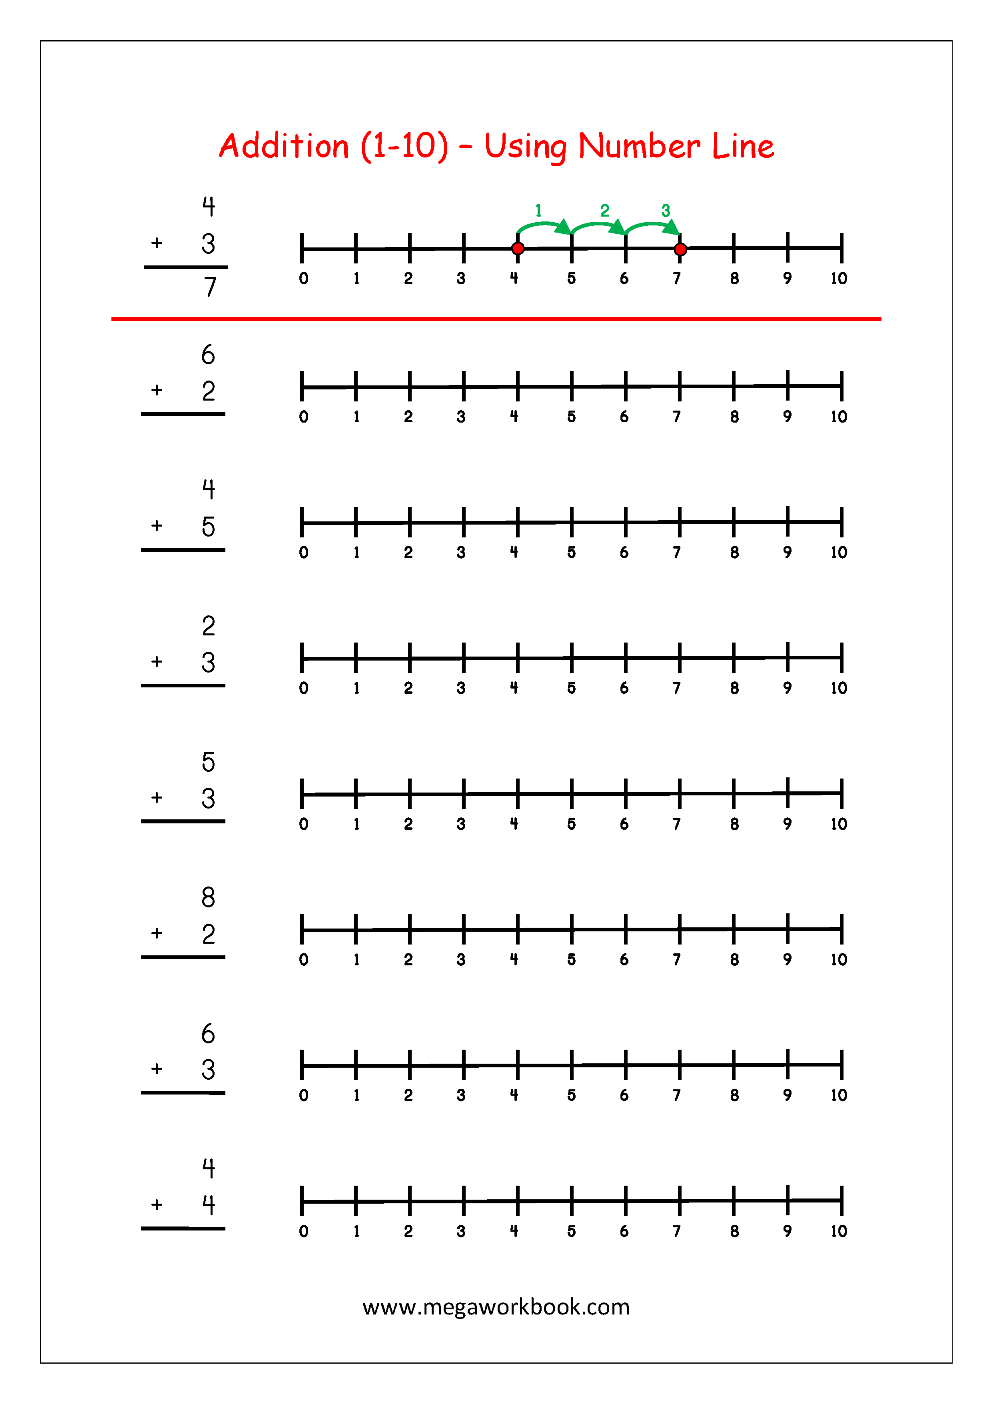 Free Printable Number Addition Worksheets 1 10 For Kindergarten And Grade 1 Addition On Number Line Addition With Pictures Objects Megaworkbook